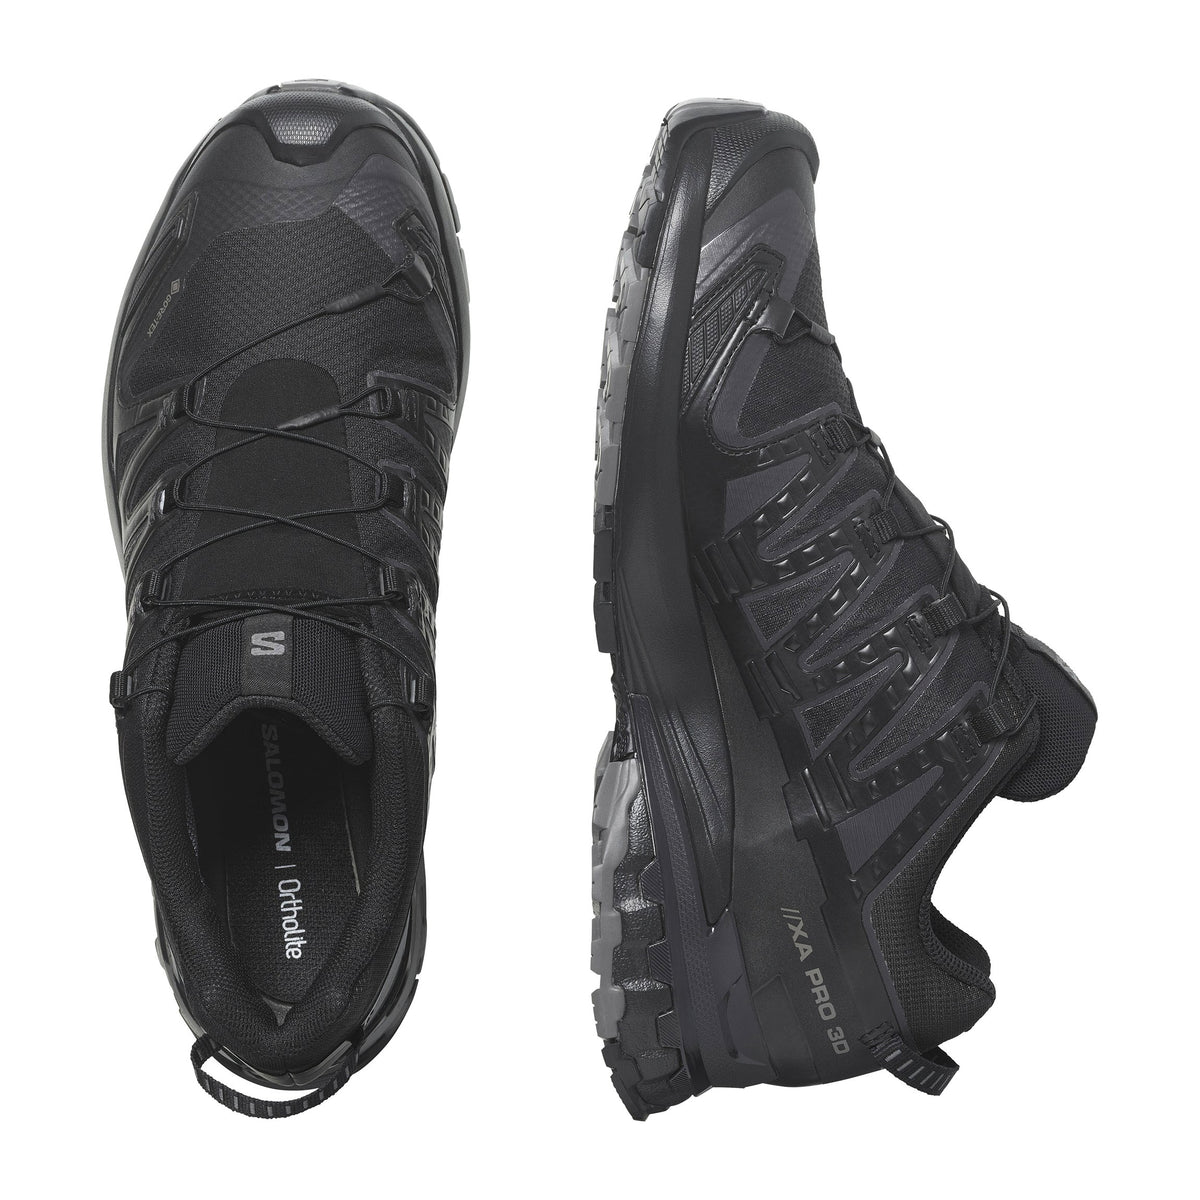 Top view of a pair of black Salomon SALOMAN XA PRO 3D V9 GTX trail running shoes, displayed with one shoe facing down and the other facing up.